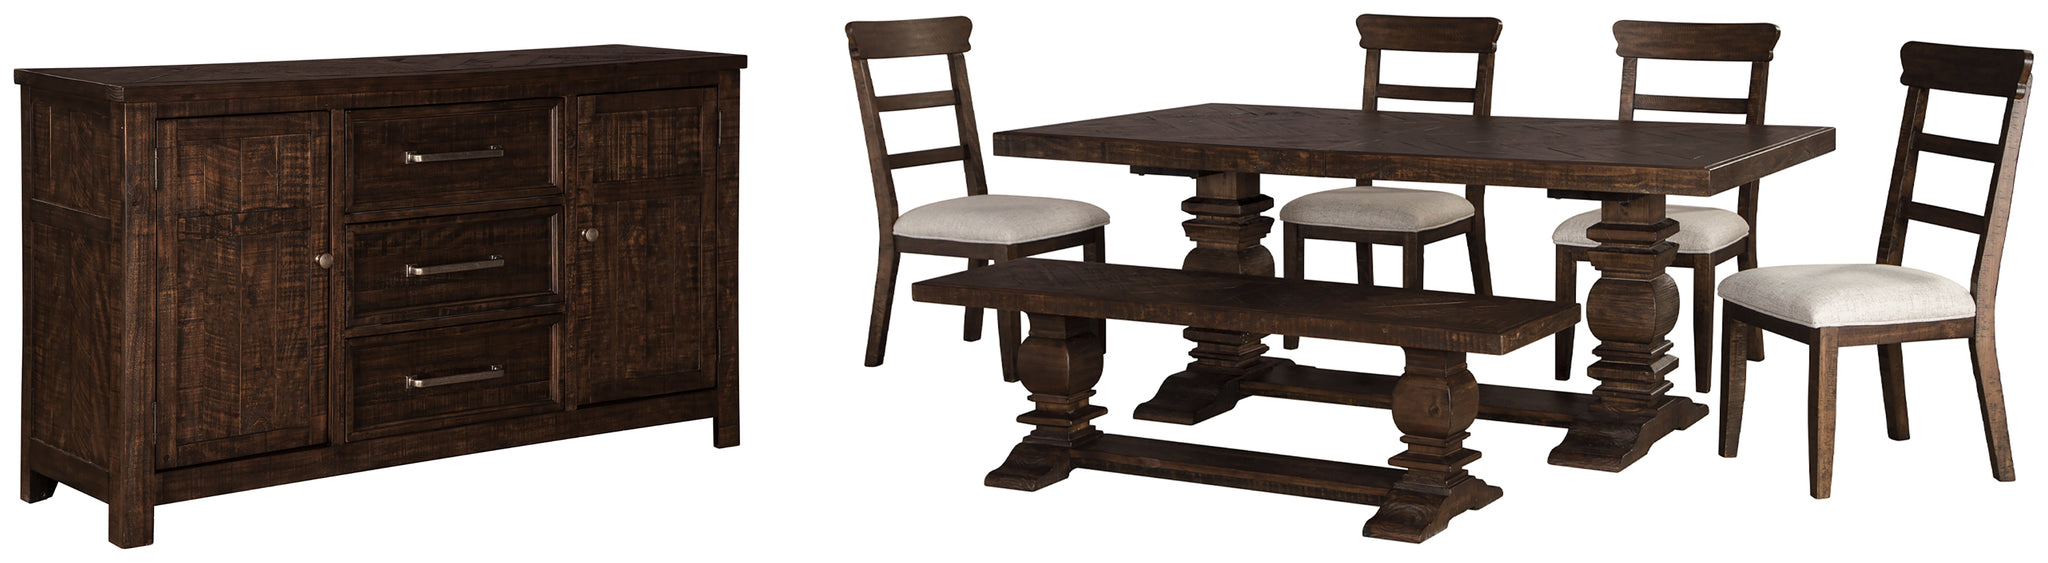 Hillcott Millennium 7-Piece Dining Room Set with Dining Room Bench